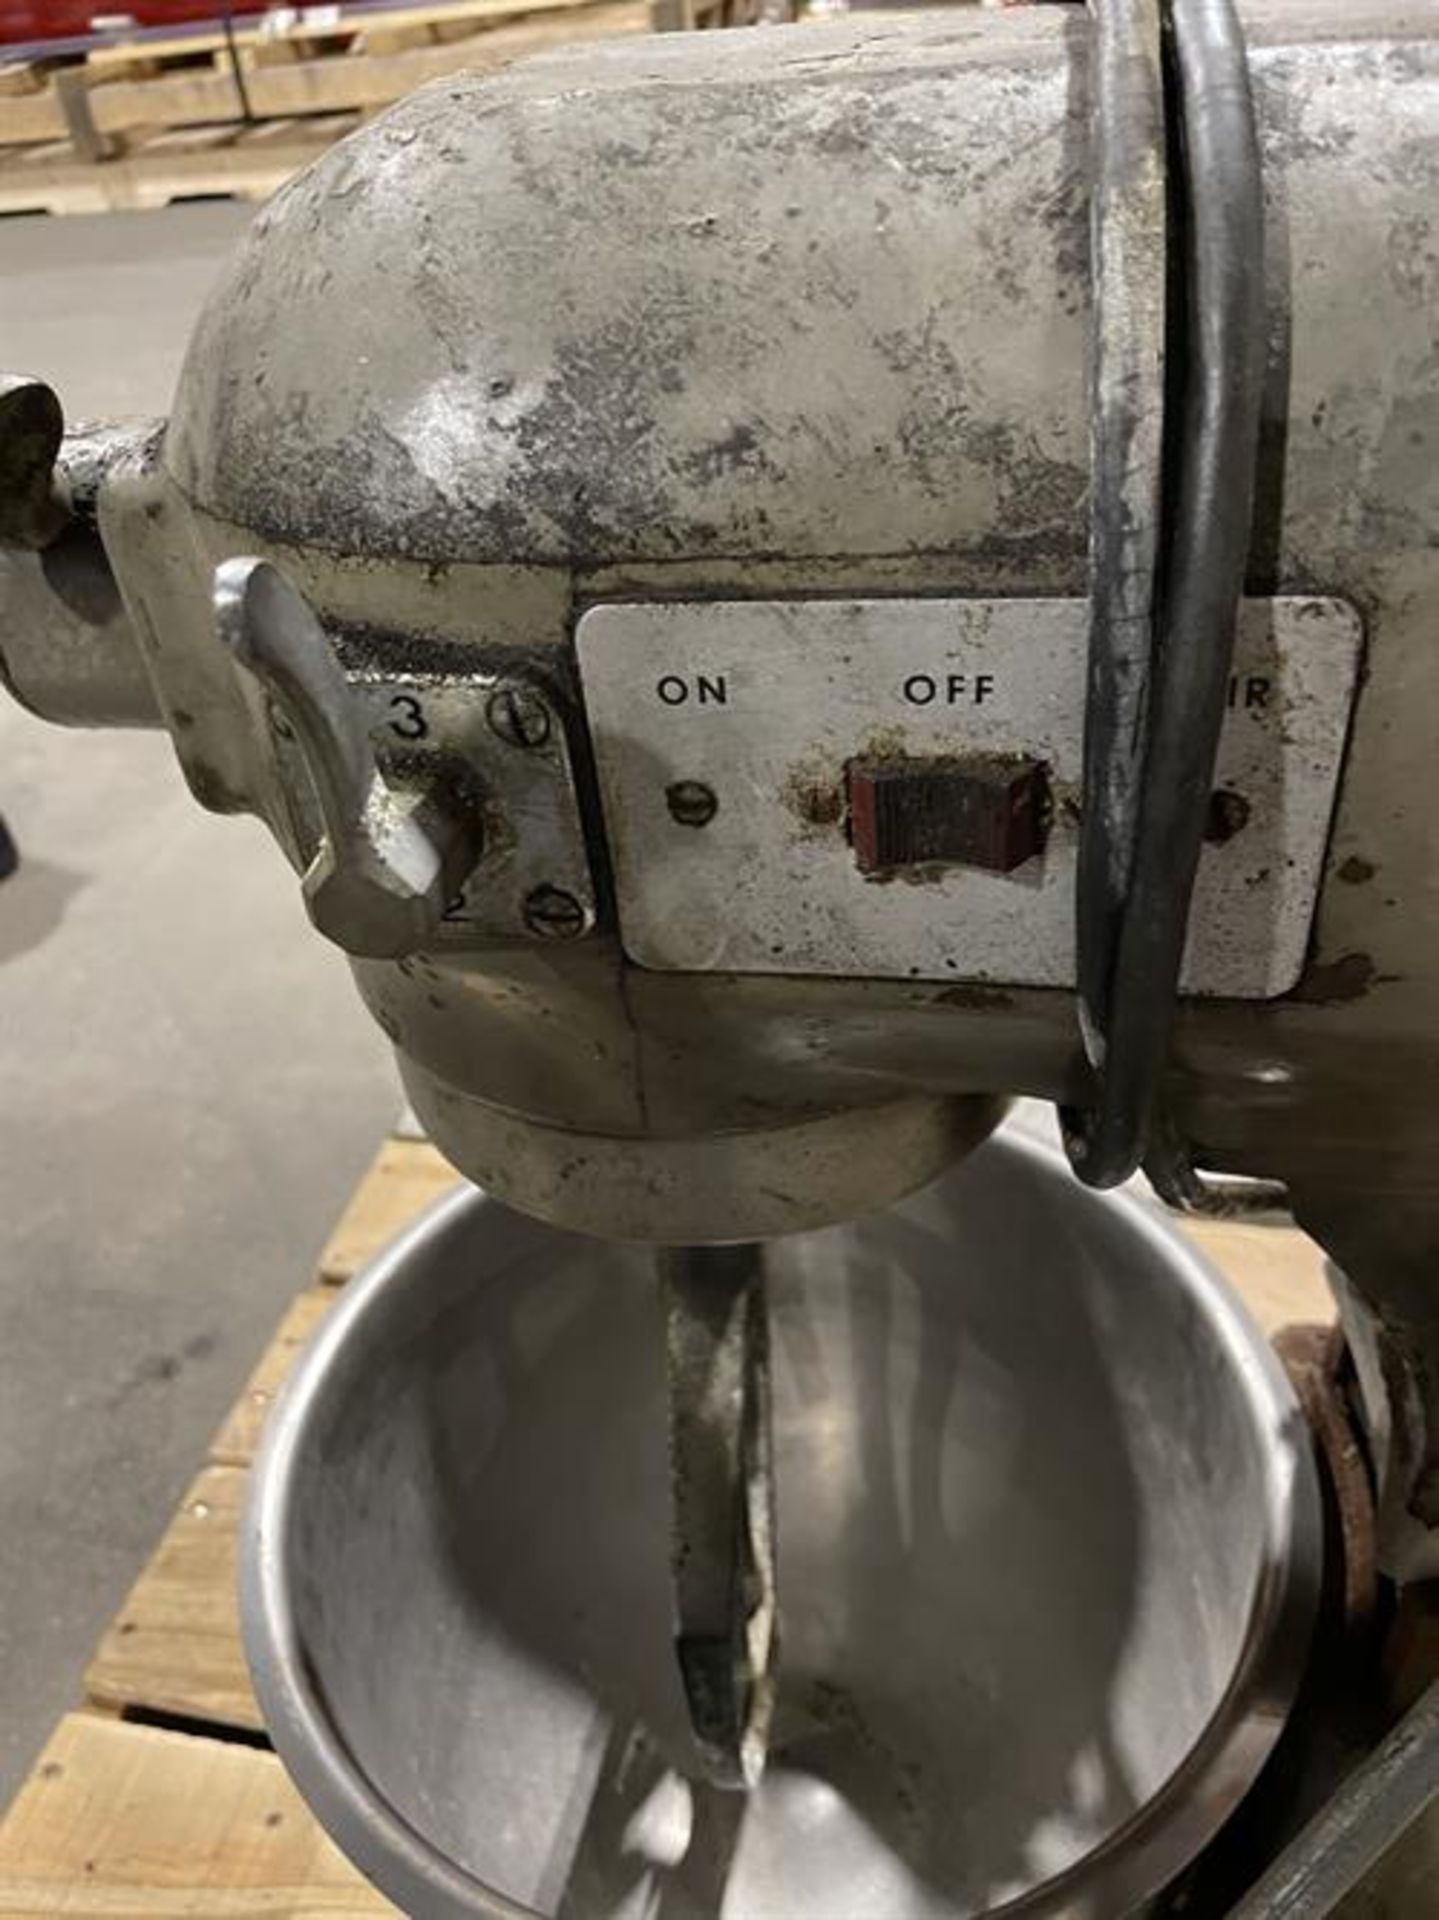 Hobart 20-qt Mixer - Model A-200, serial#1684197 - Tinned bowl and flat beater - 3 speed - 115 - Image 6 of 6